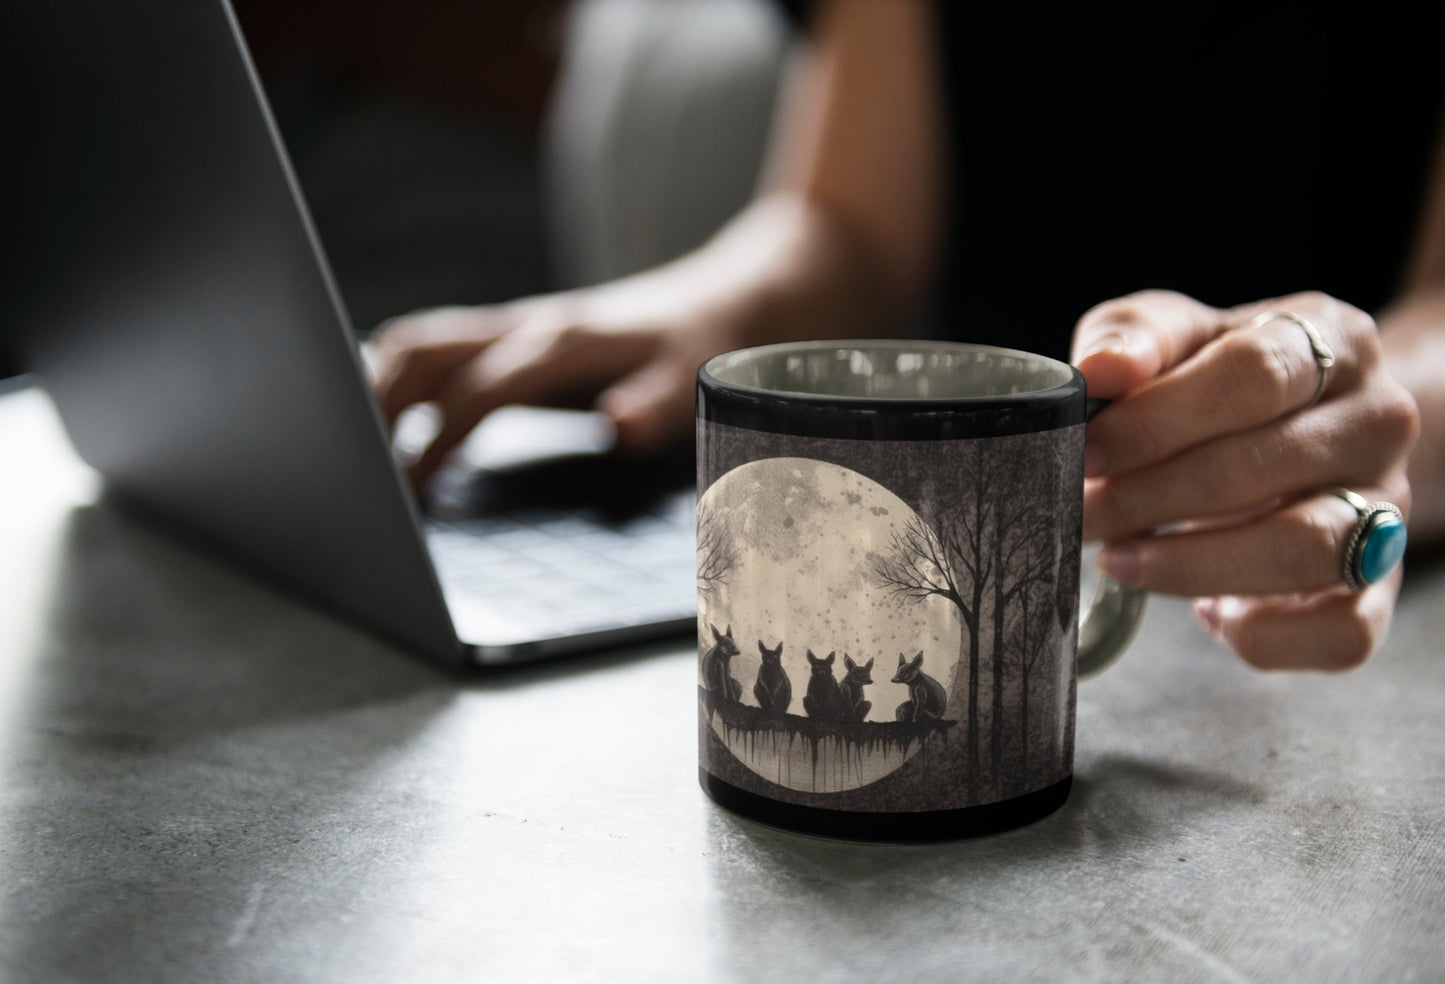 a woman sitting at a desk holding a black coffee mug with an illustration of foxes sitting in front of a full moon in a forest printed on it.